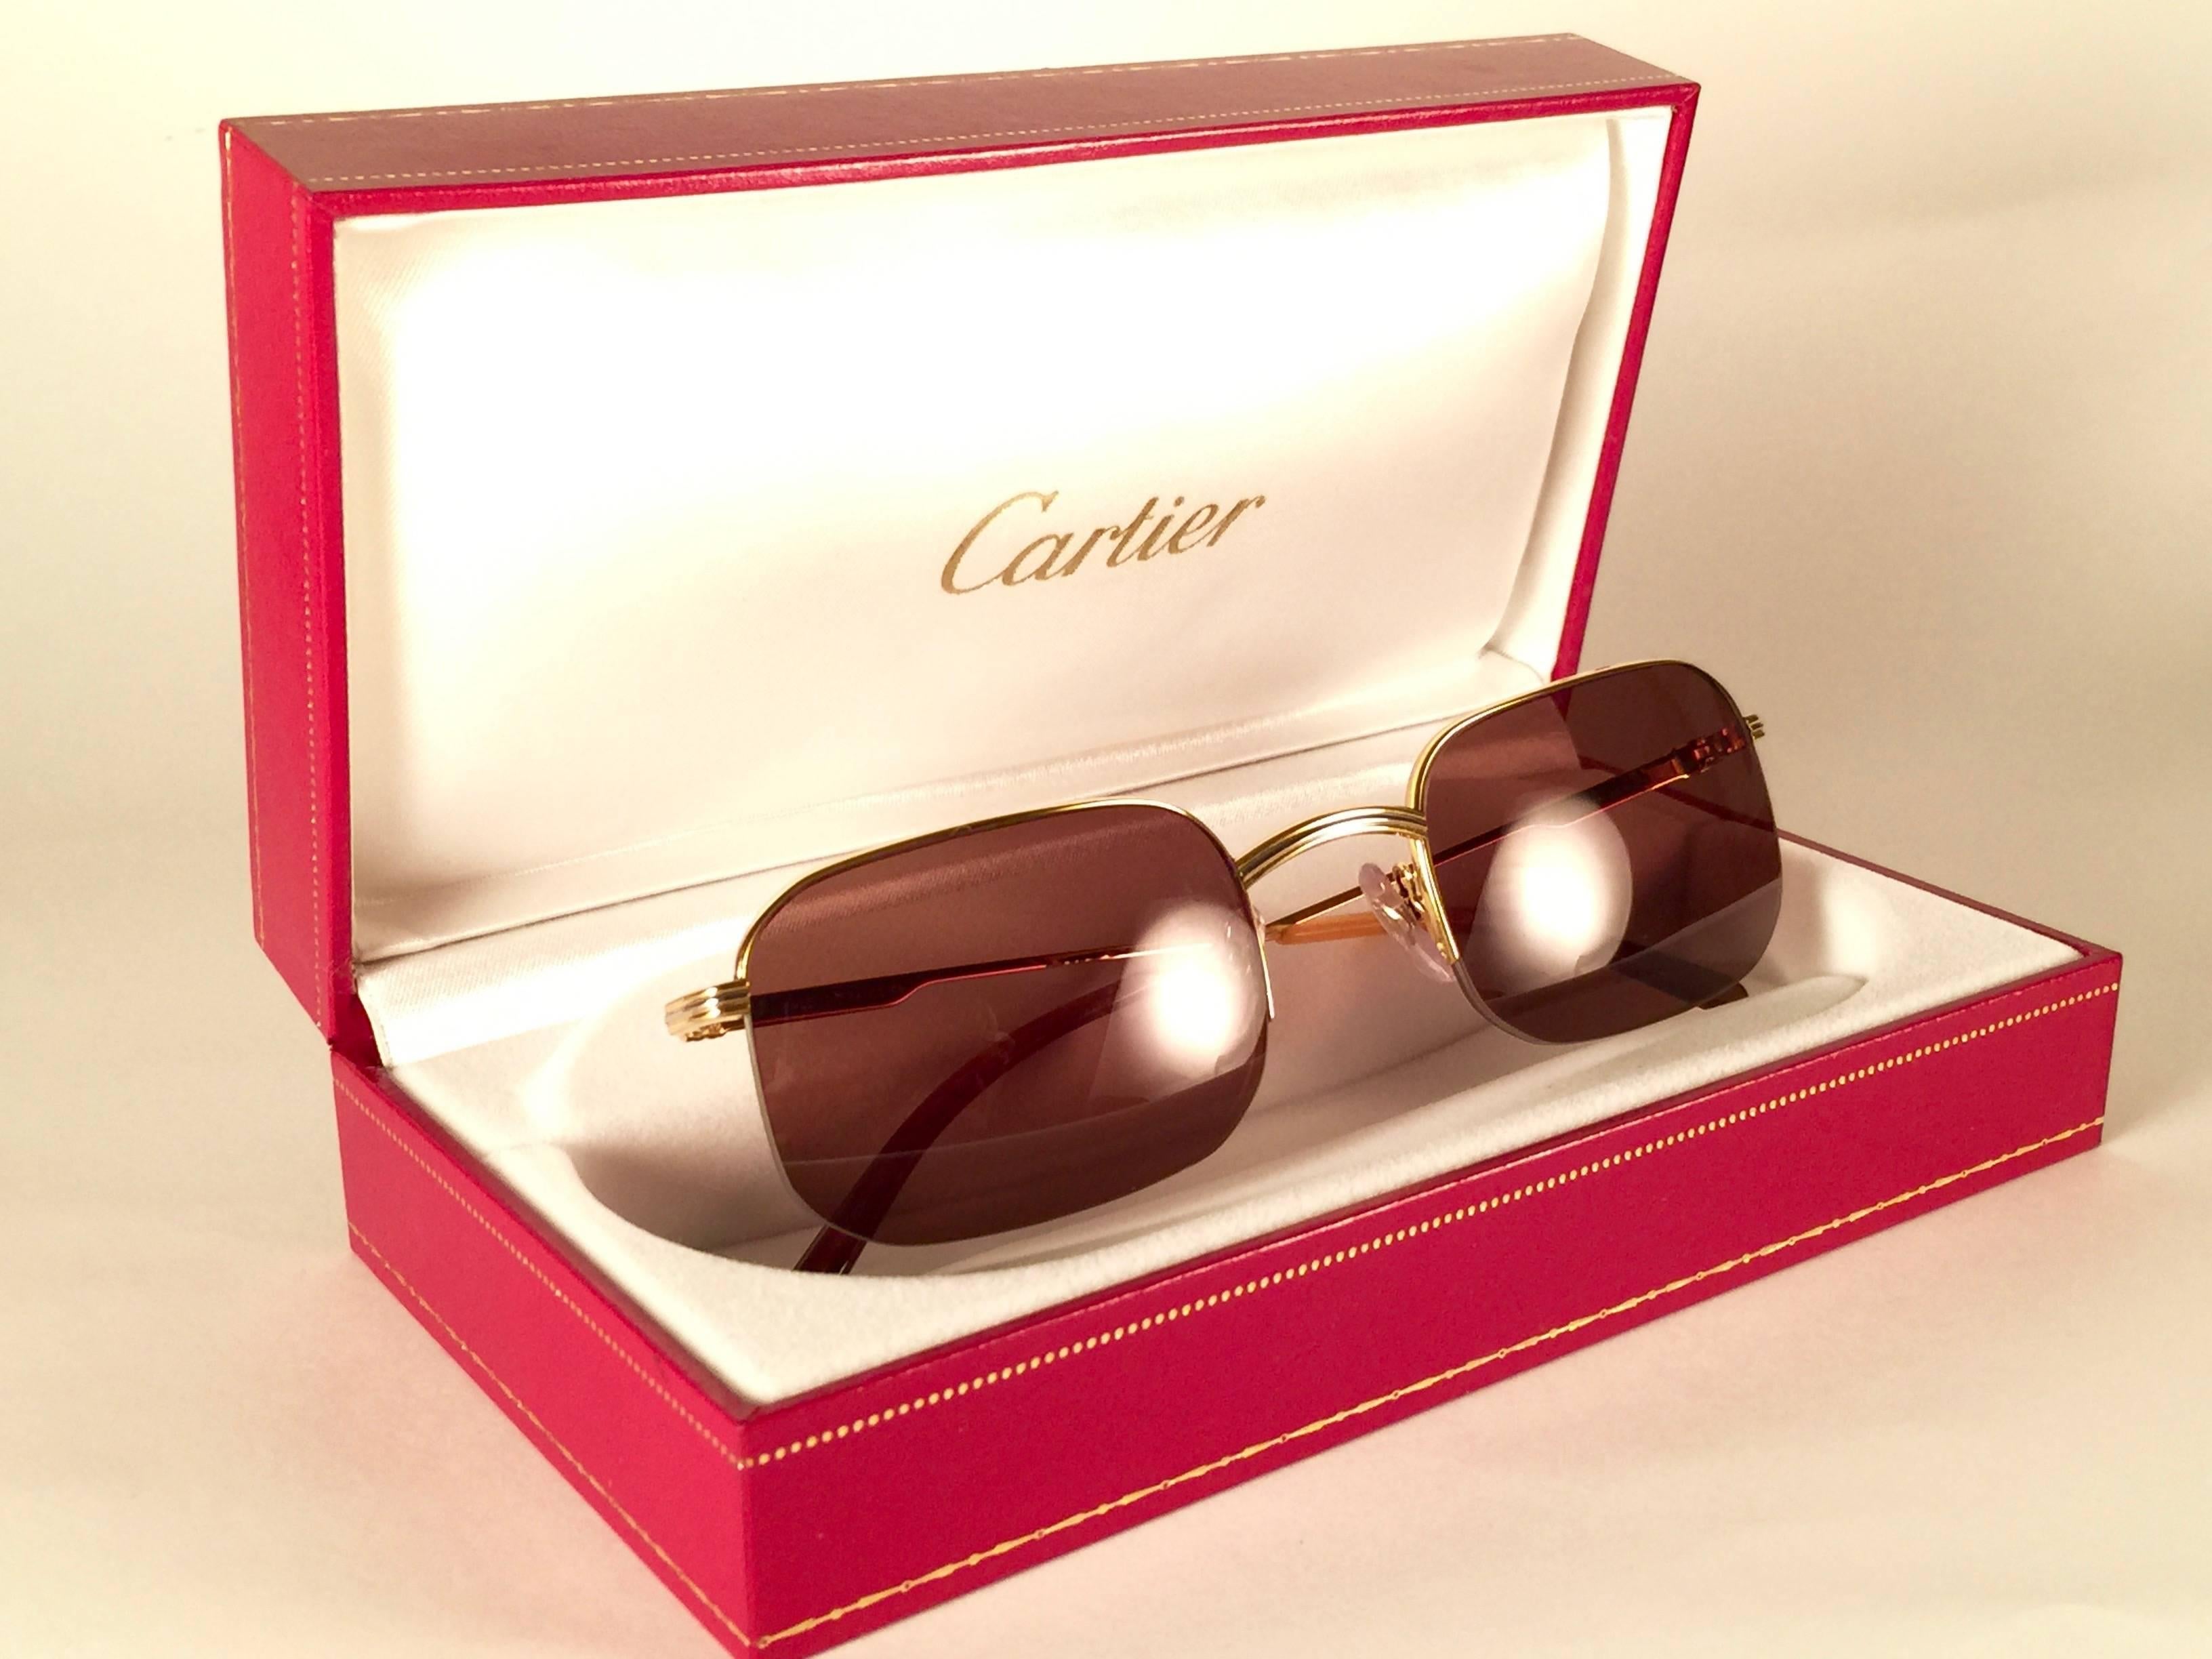 New 1990 Cartier Broadway half frame Vendome 49 22 Sunglasses with brown (uv protection) lenses. All hallmarks. Cartier gold signs on the ear paddles. These are like a pair of jewels on your nose. Please notice that this sunglasses are nearly 30